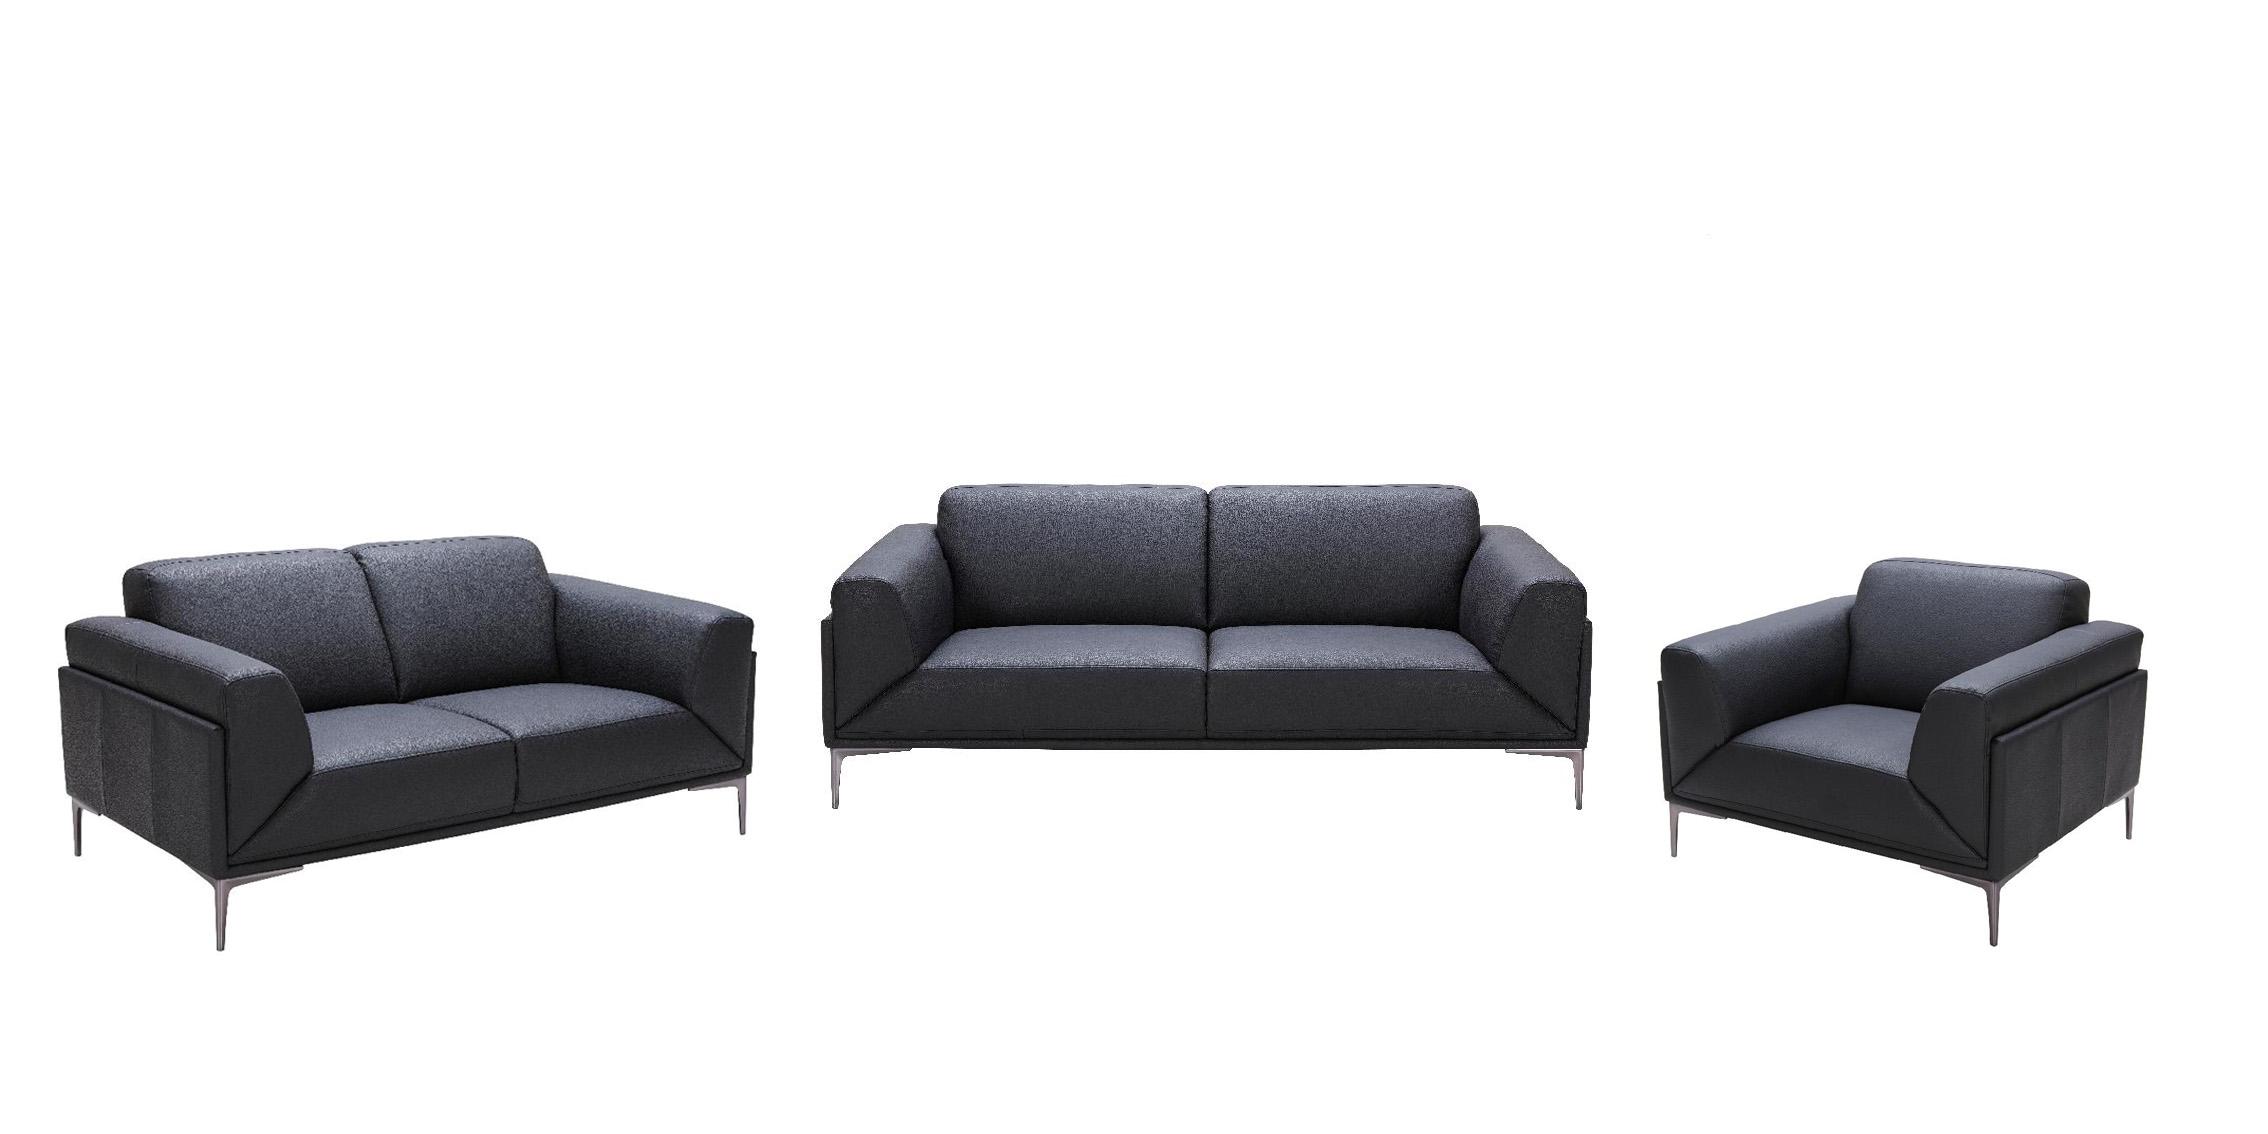 Modern Sofa Loveseat and Chair Set Knight SKU18249-Set-3 in Black Leather